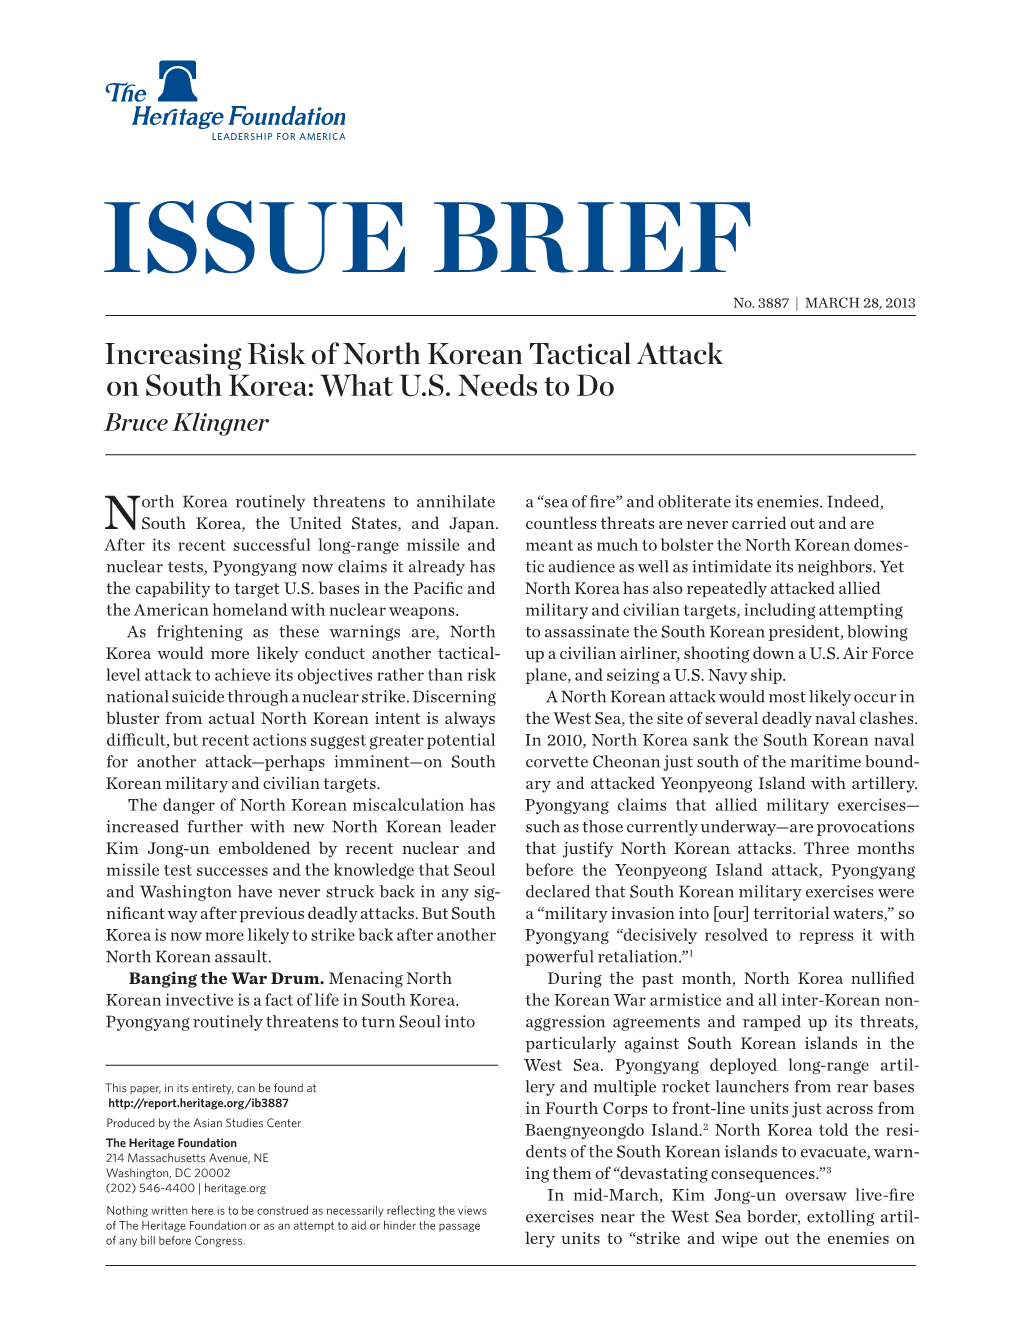 Increasing Risk of North Korean Tactical Attack on South Korea: What U.S